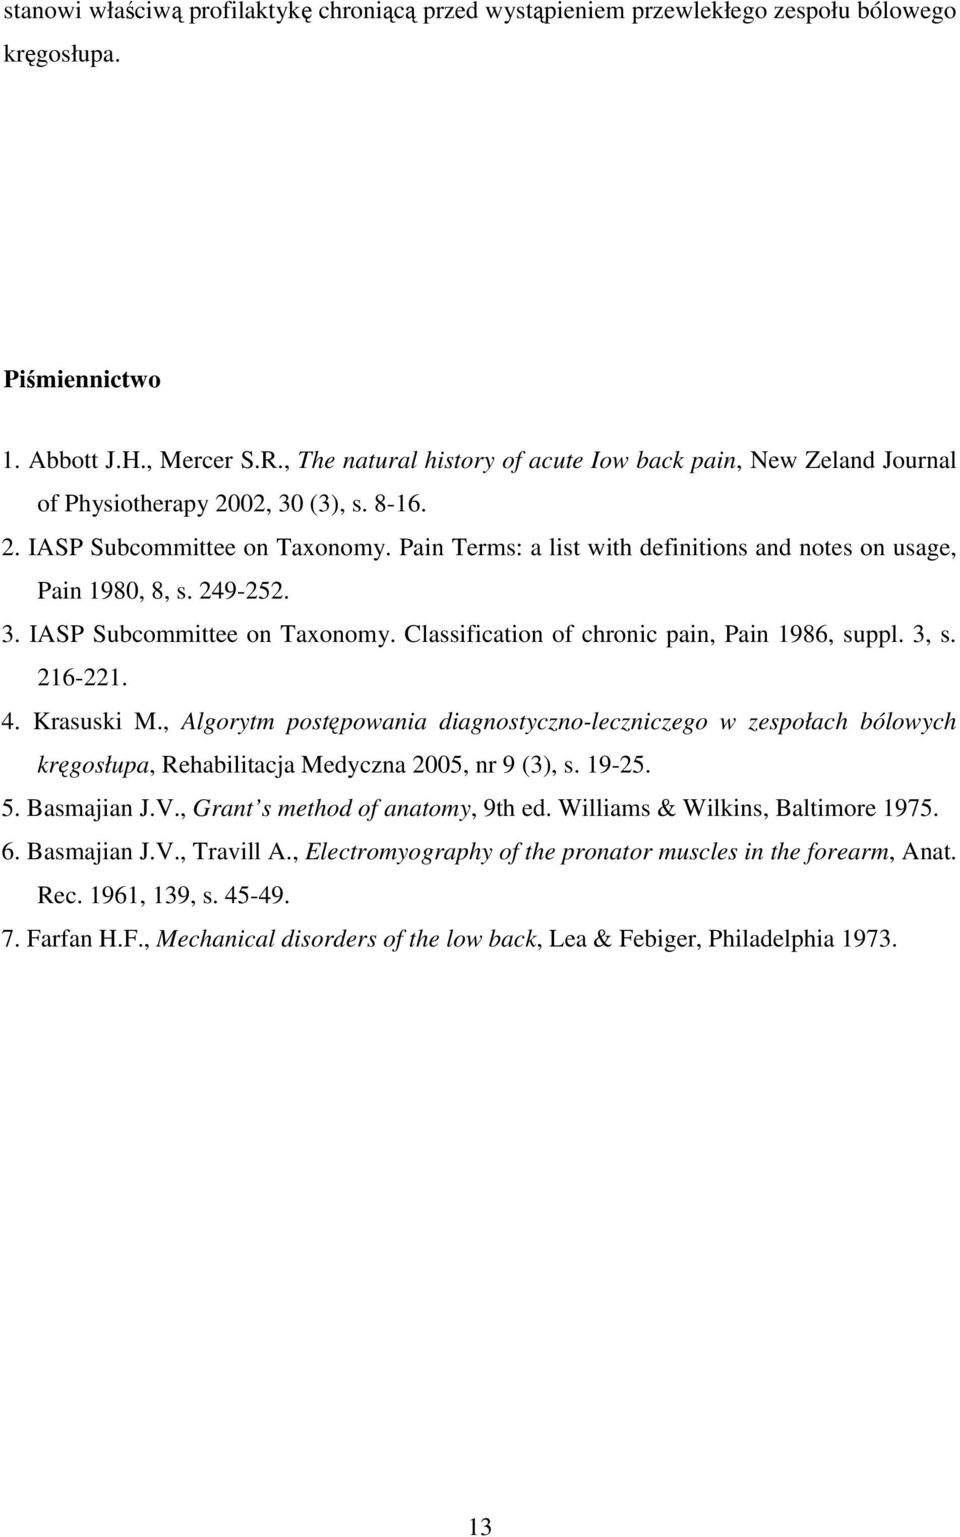 Pain Terms: a list with definitions and notes on usage, Pain 1980, 8, s. 249-252. 3. IASP Subcommittee on Taxonomy. Classification of chronic pain, Pain 1986, suppl. 3, s. 216-221. 4. Krasuski M.